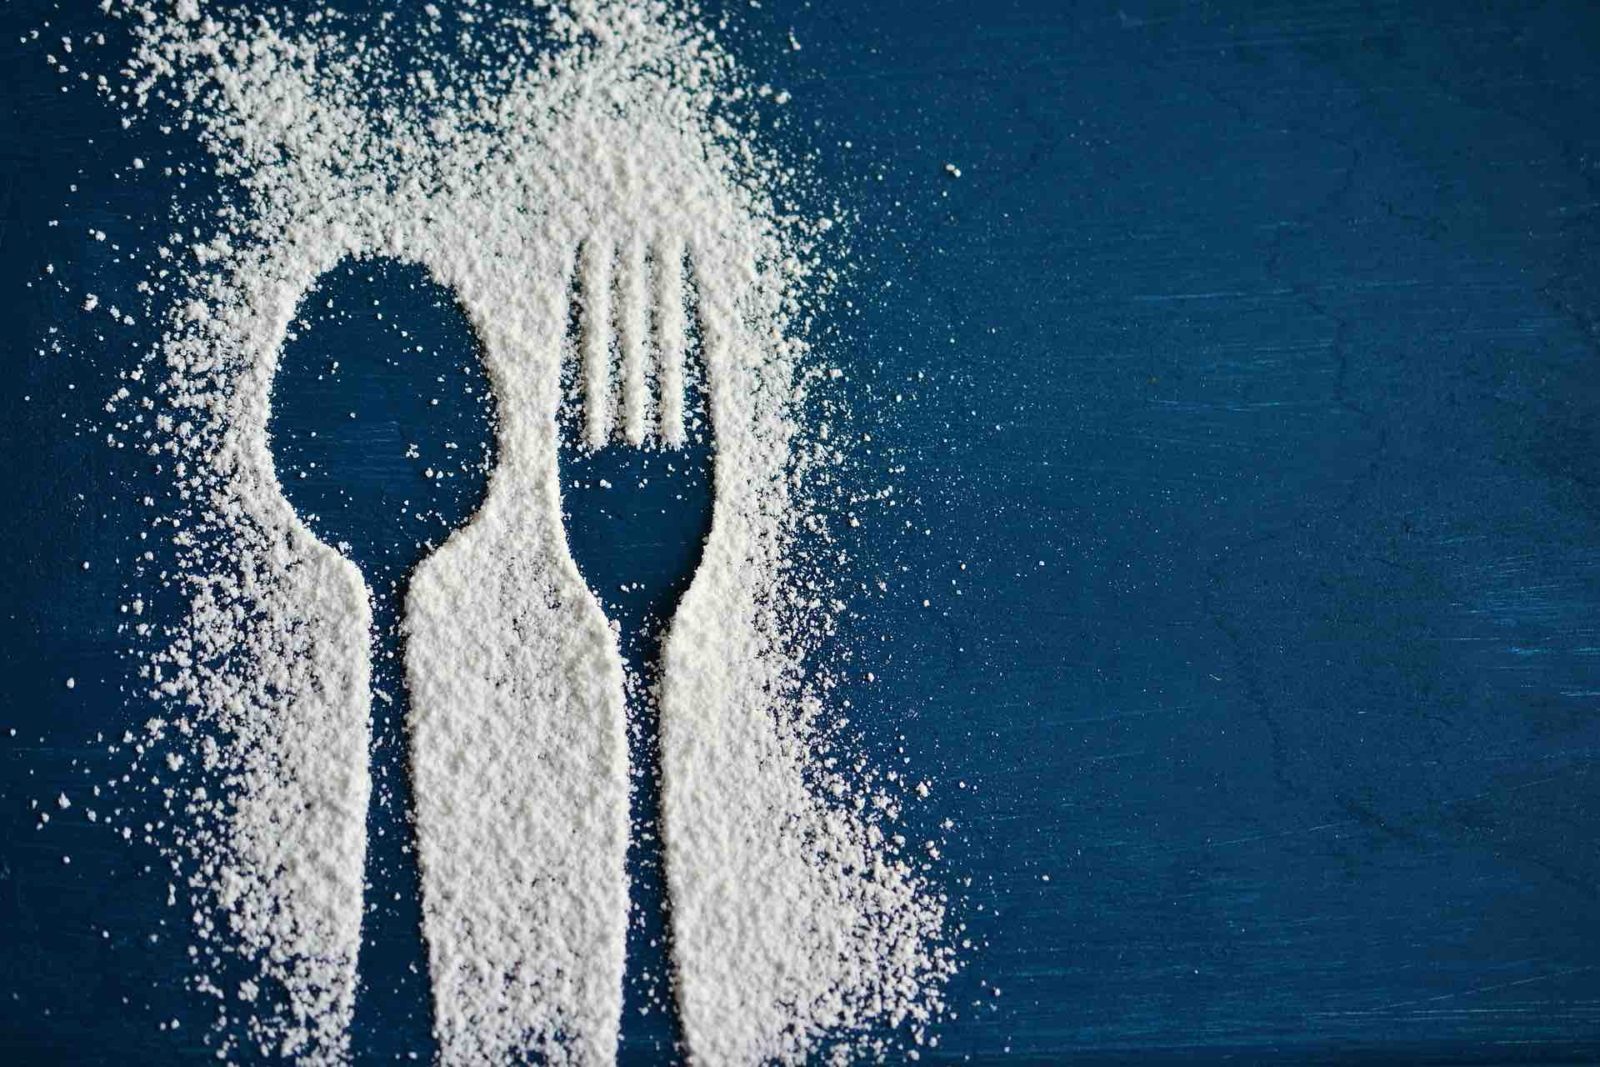 white processed powder outlining spoon and fork